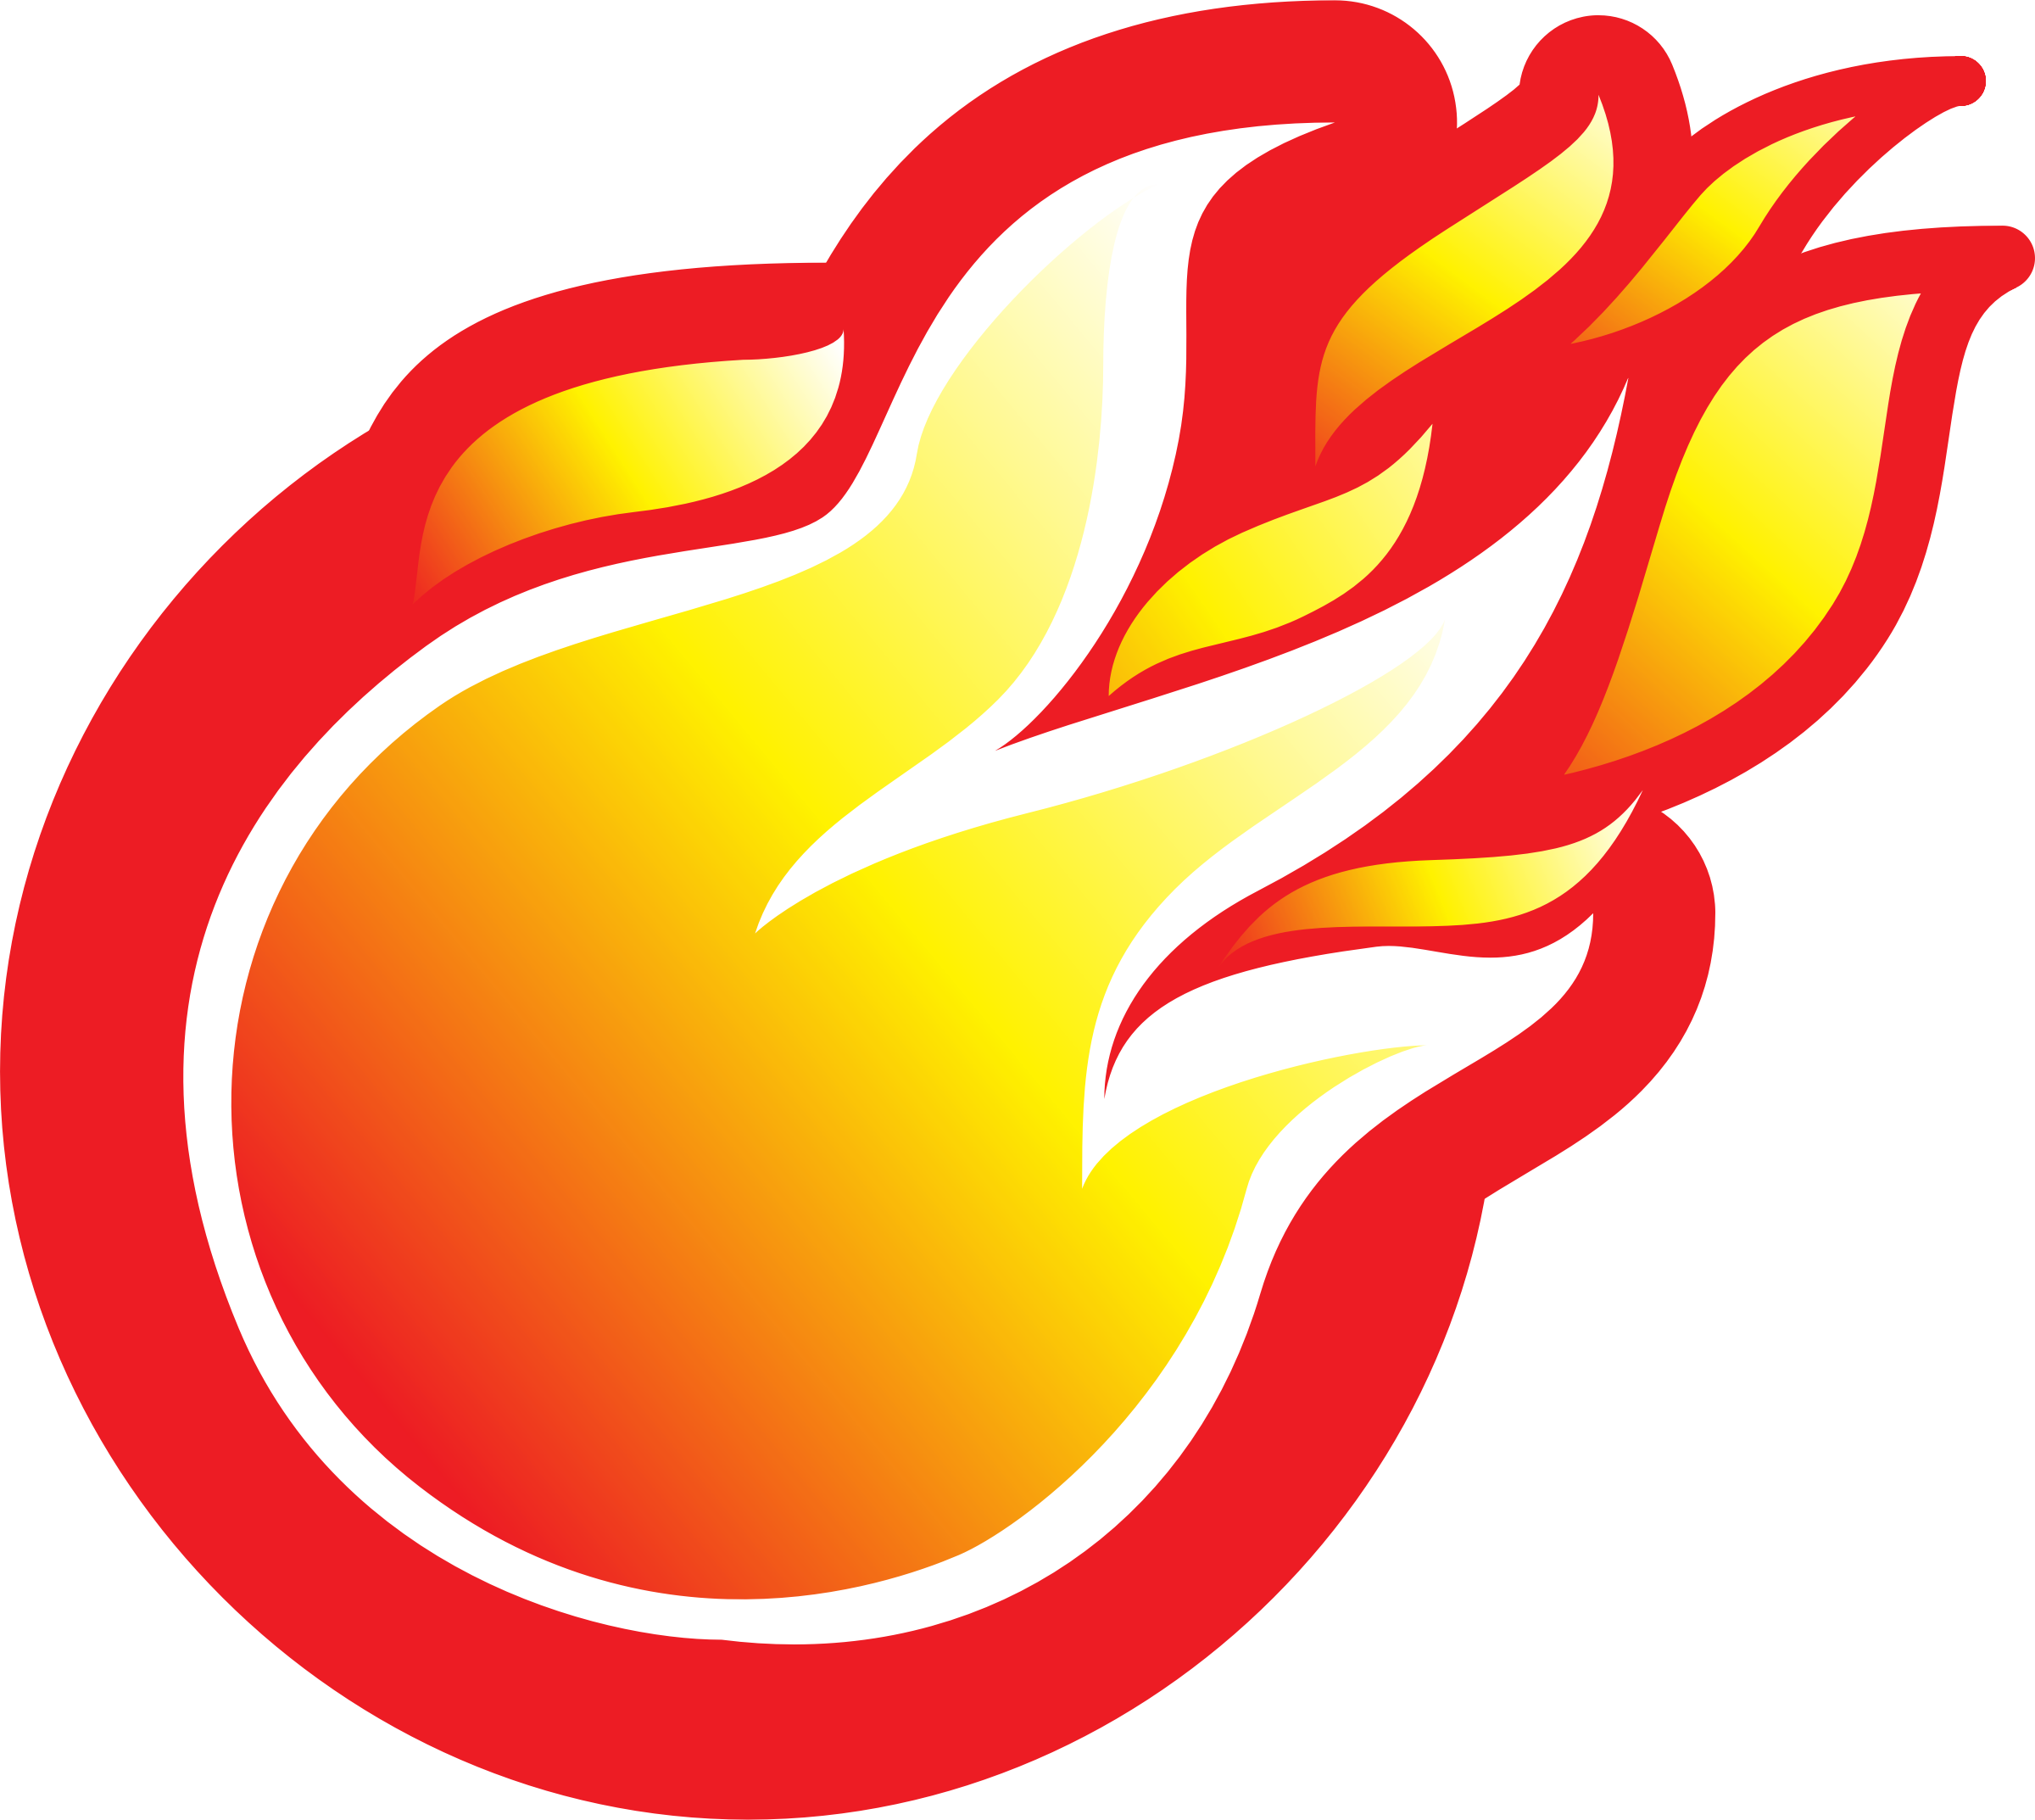 Flame clipart images